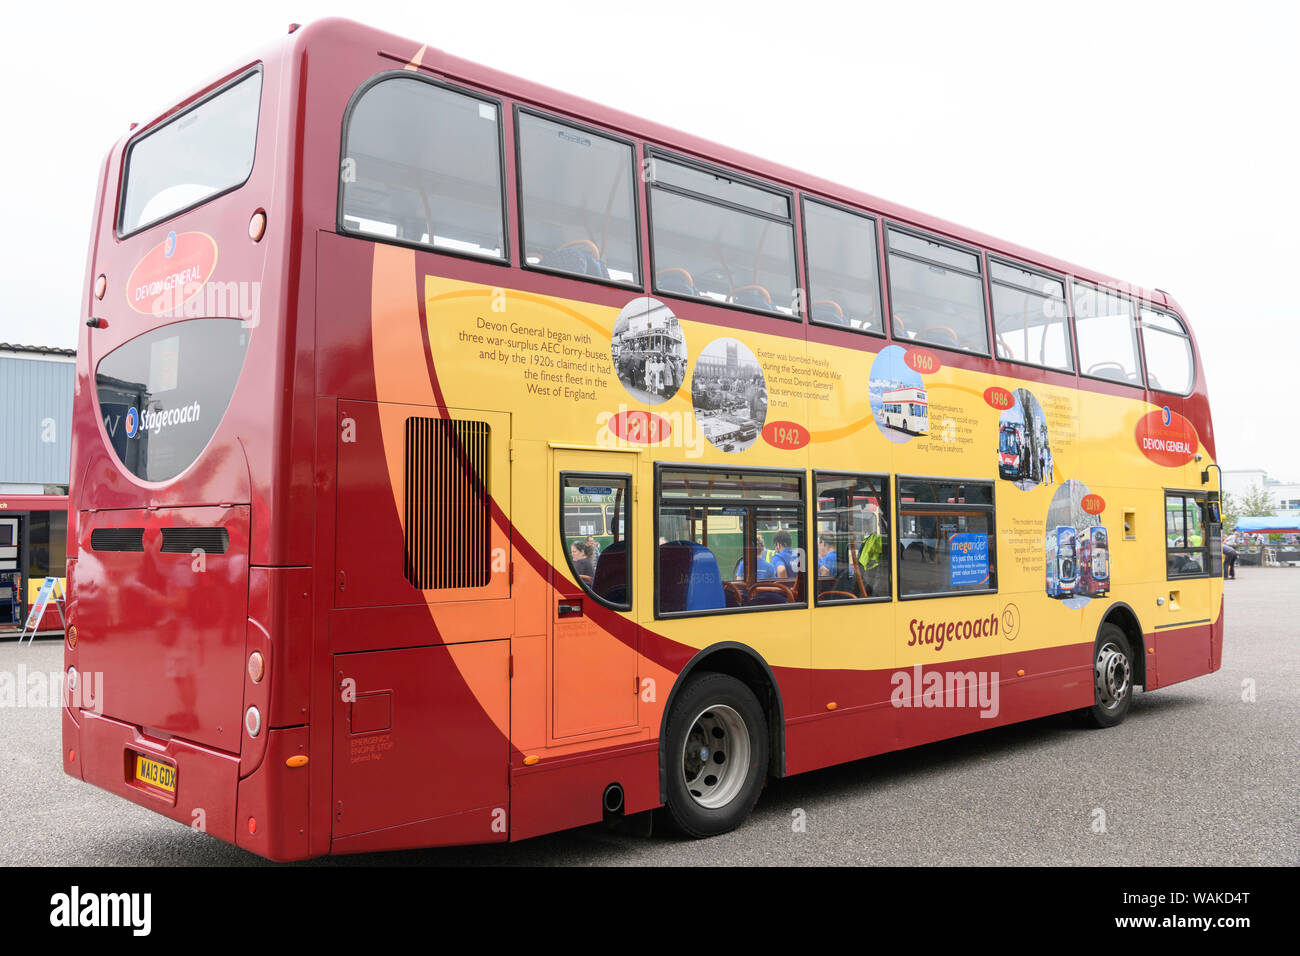 Modern Stagecoach South West double decker bus with special livery to celebrate 100 years of bus travel in Devon. Stock Photo